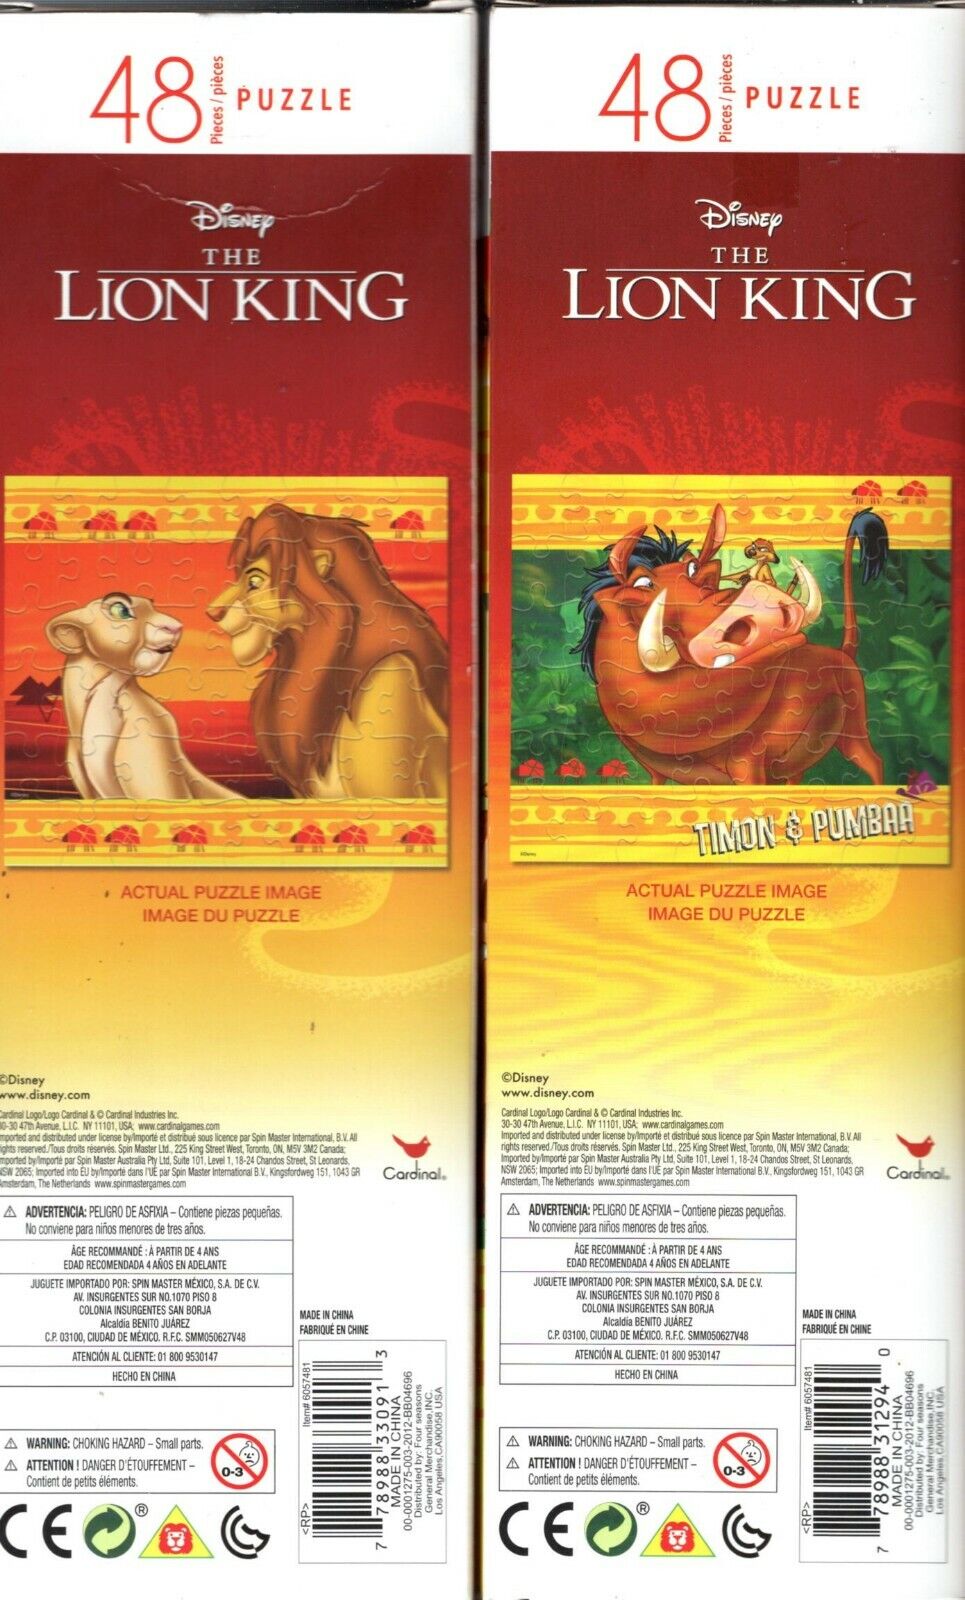 The Lion King - 48 Pieces Jigsaw Puzzle (Set of 2) v4